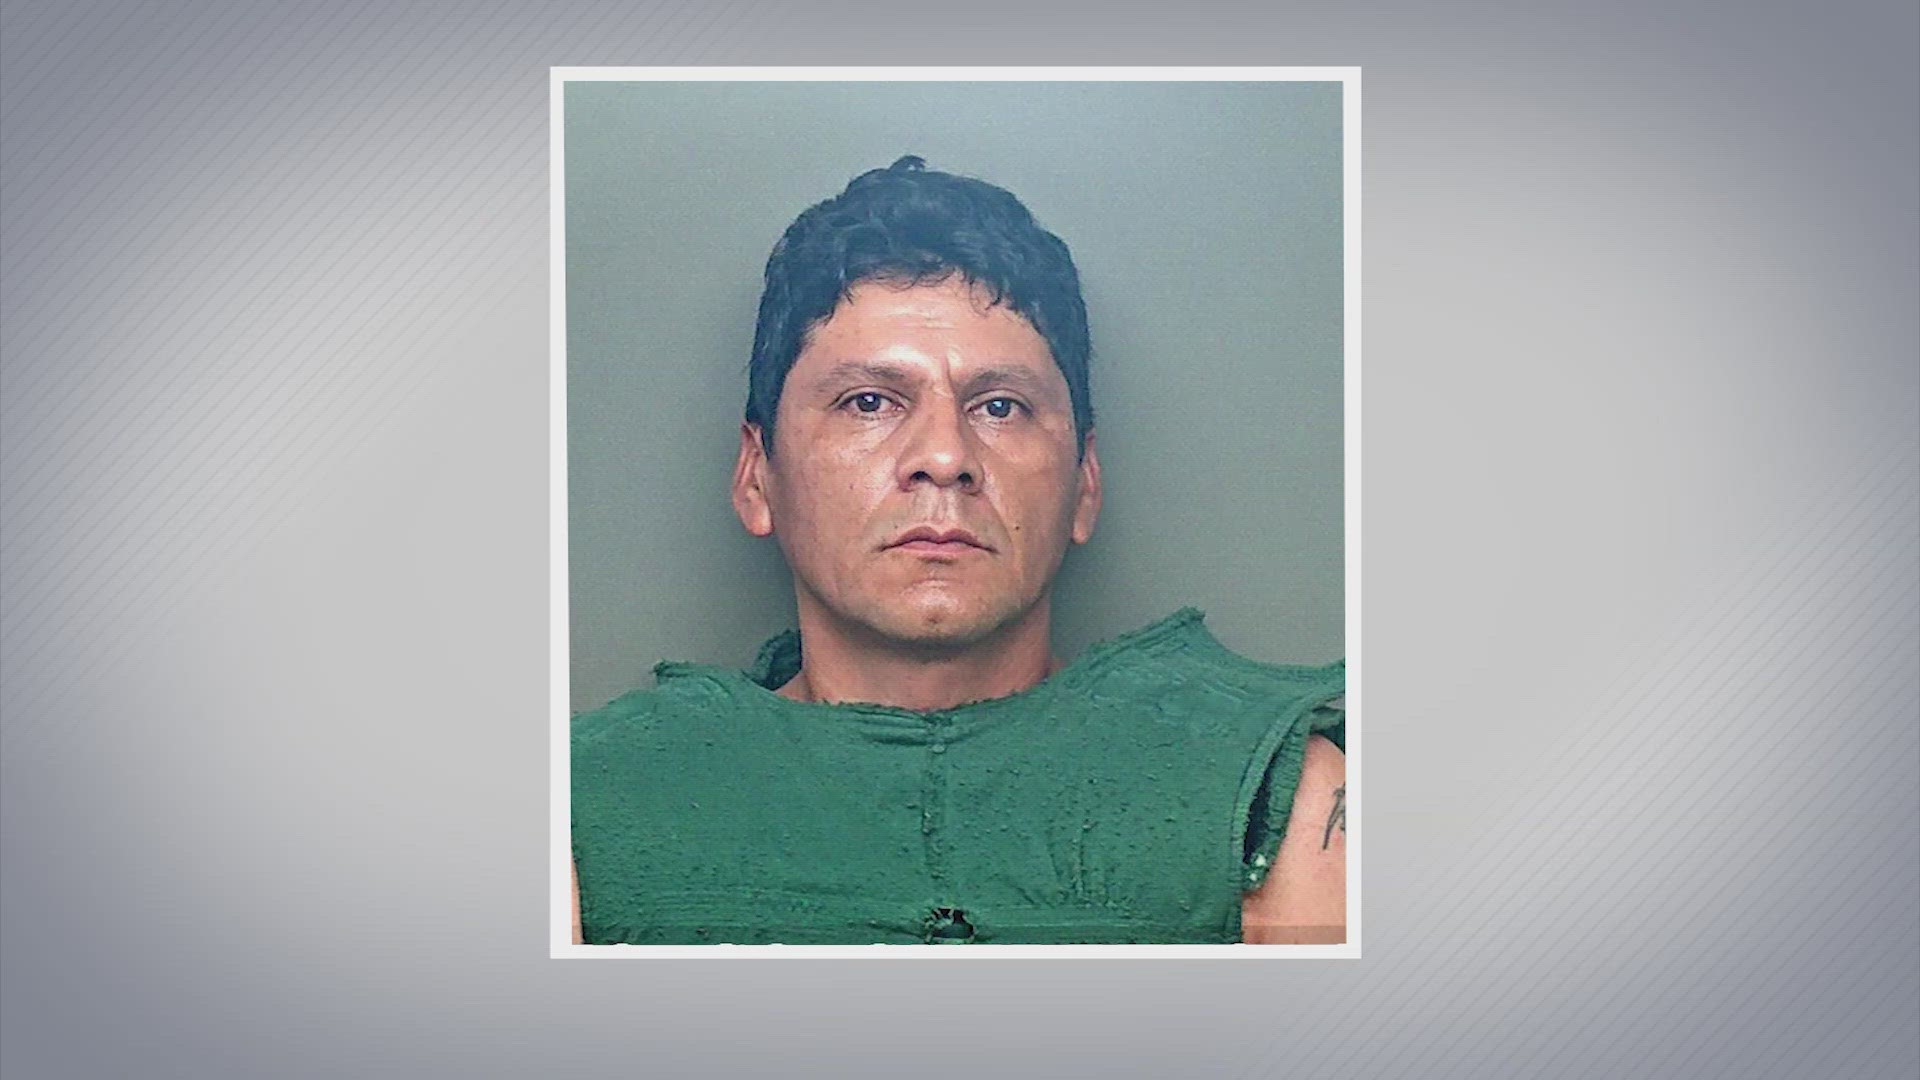 Francisco Oropeza, 38, will face a magistrate judge Wednesday, according to the San Jacinto County Sheriff's Office.